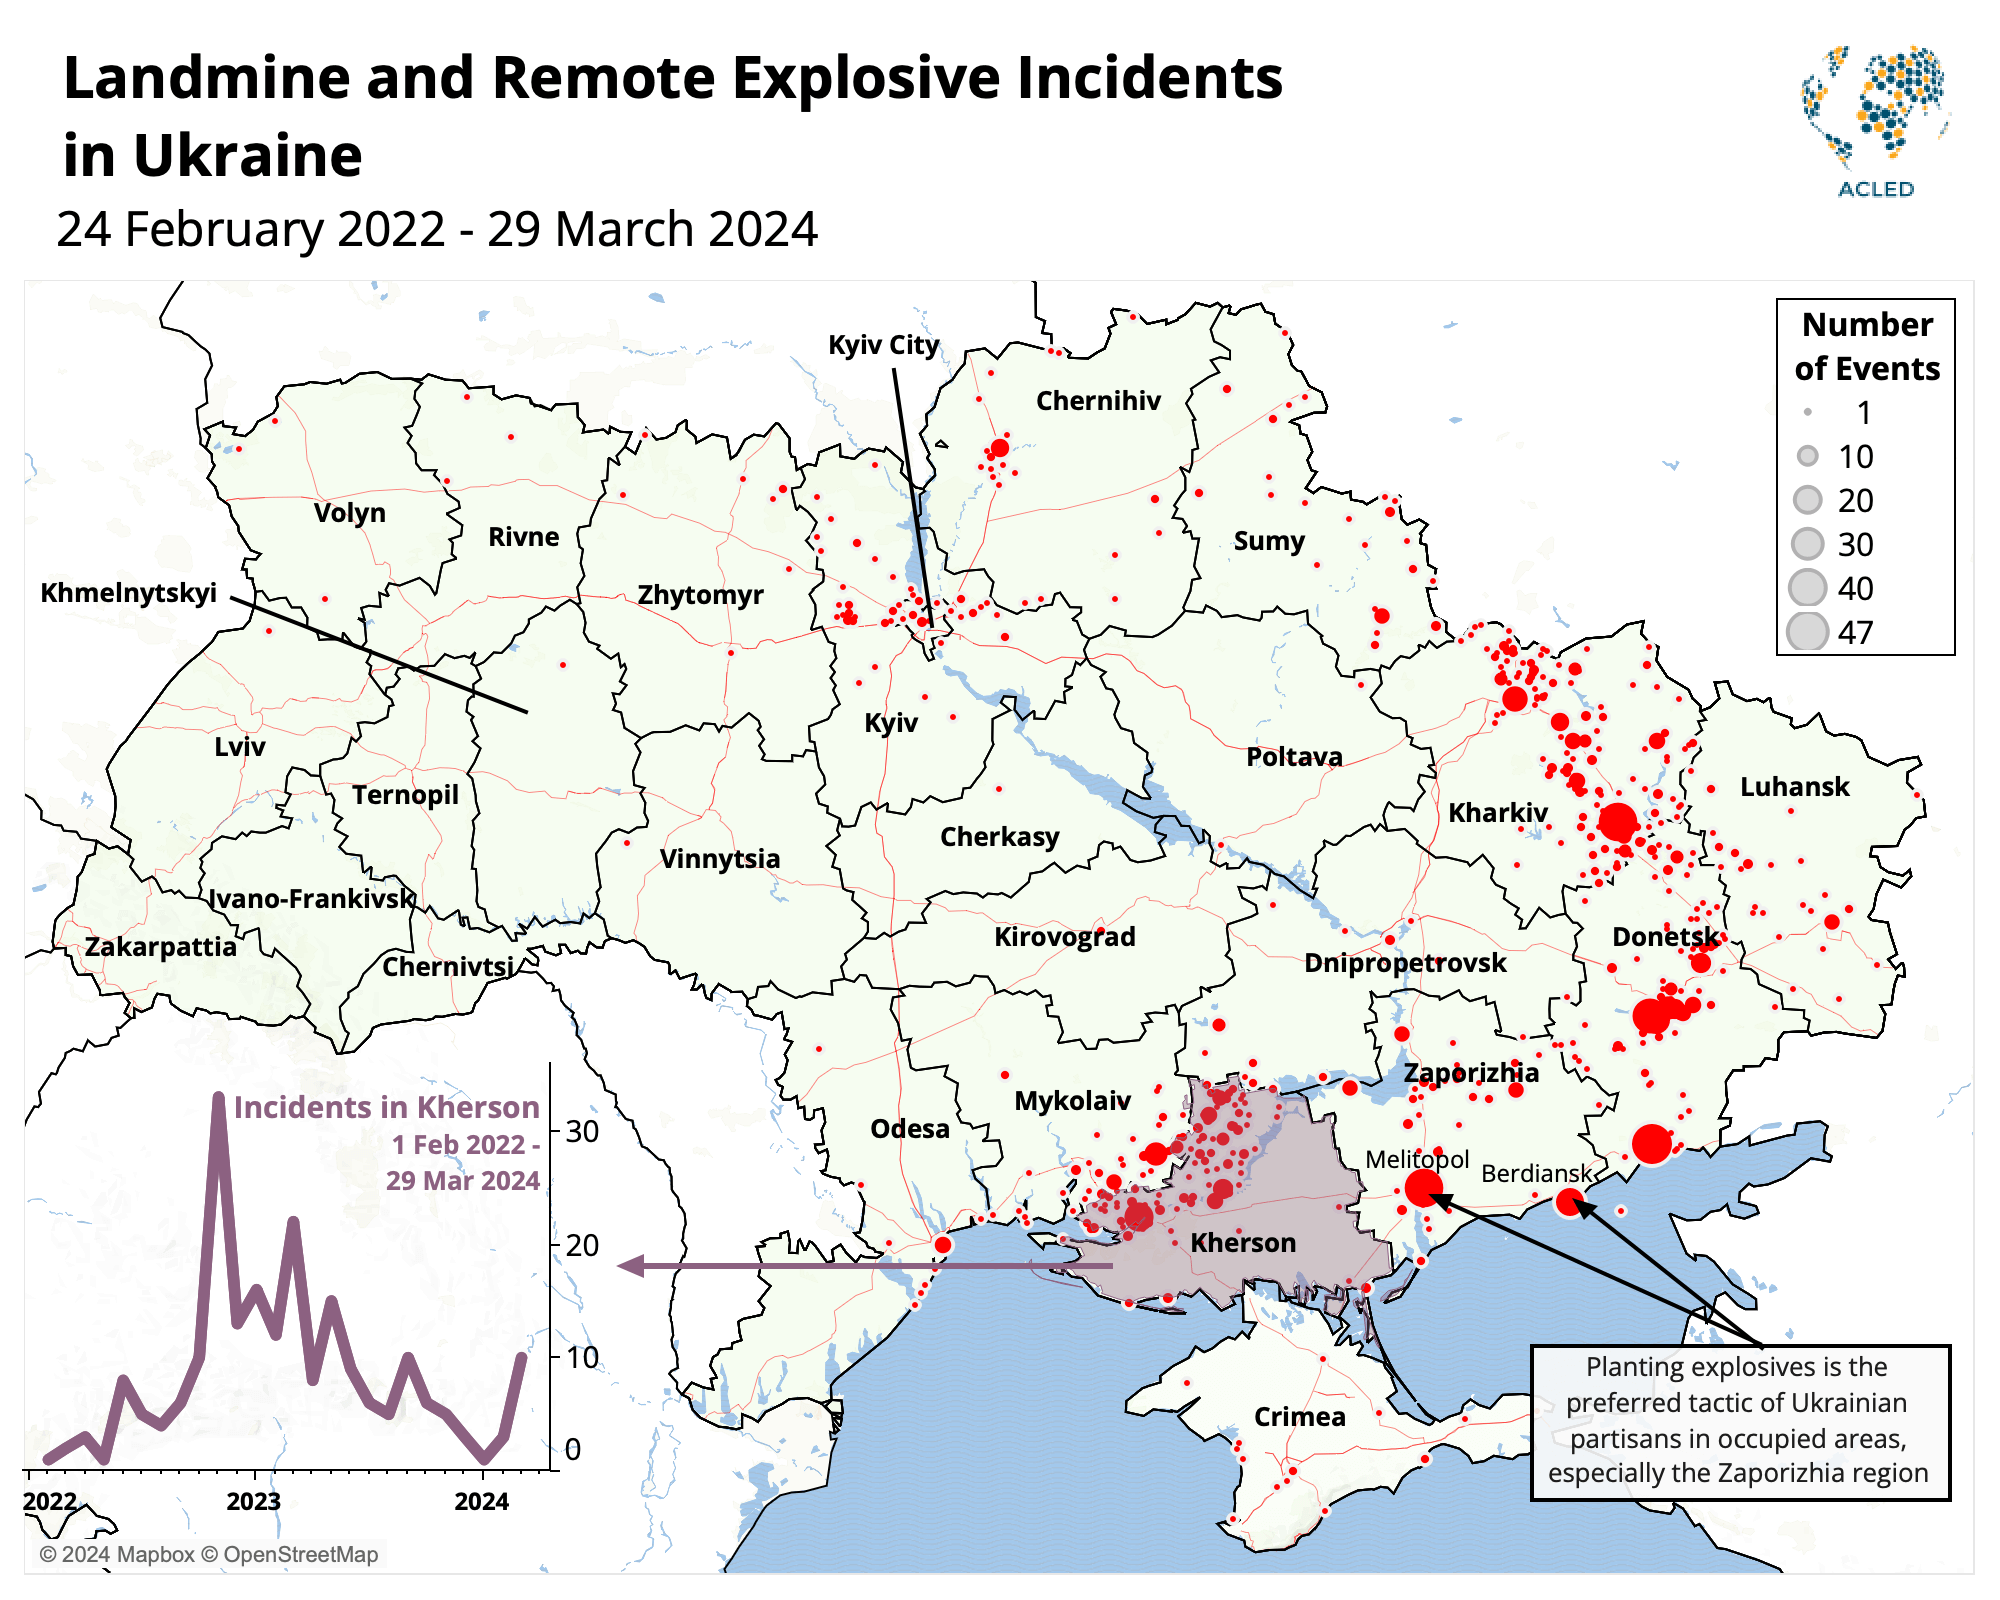 Infographic - Landmine and remote explosive incidents in Ukraine 24 February 2022 - 29 March 2024